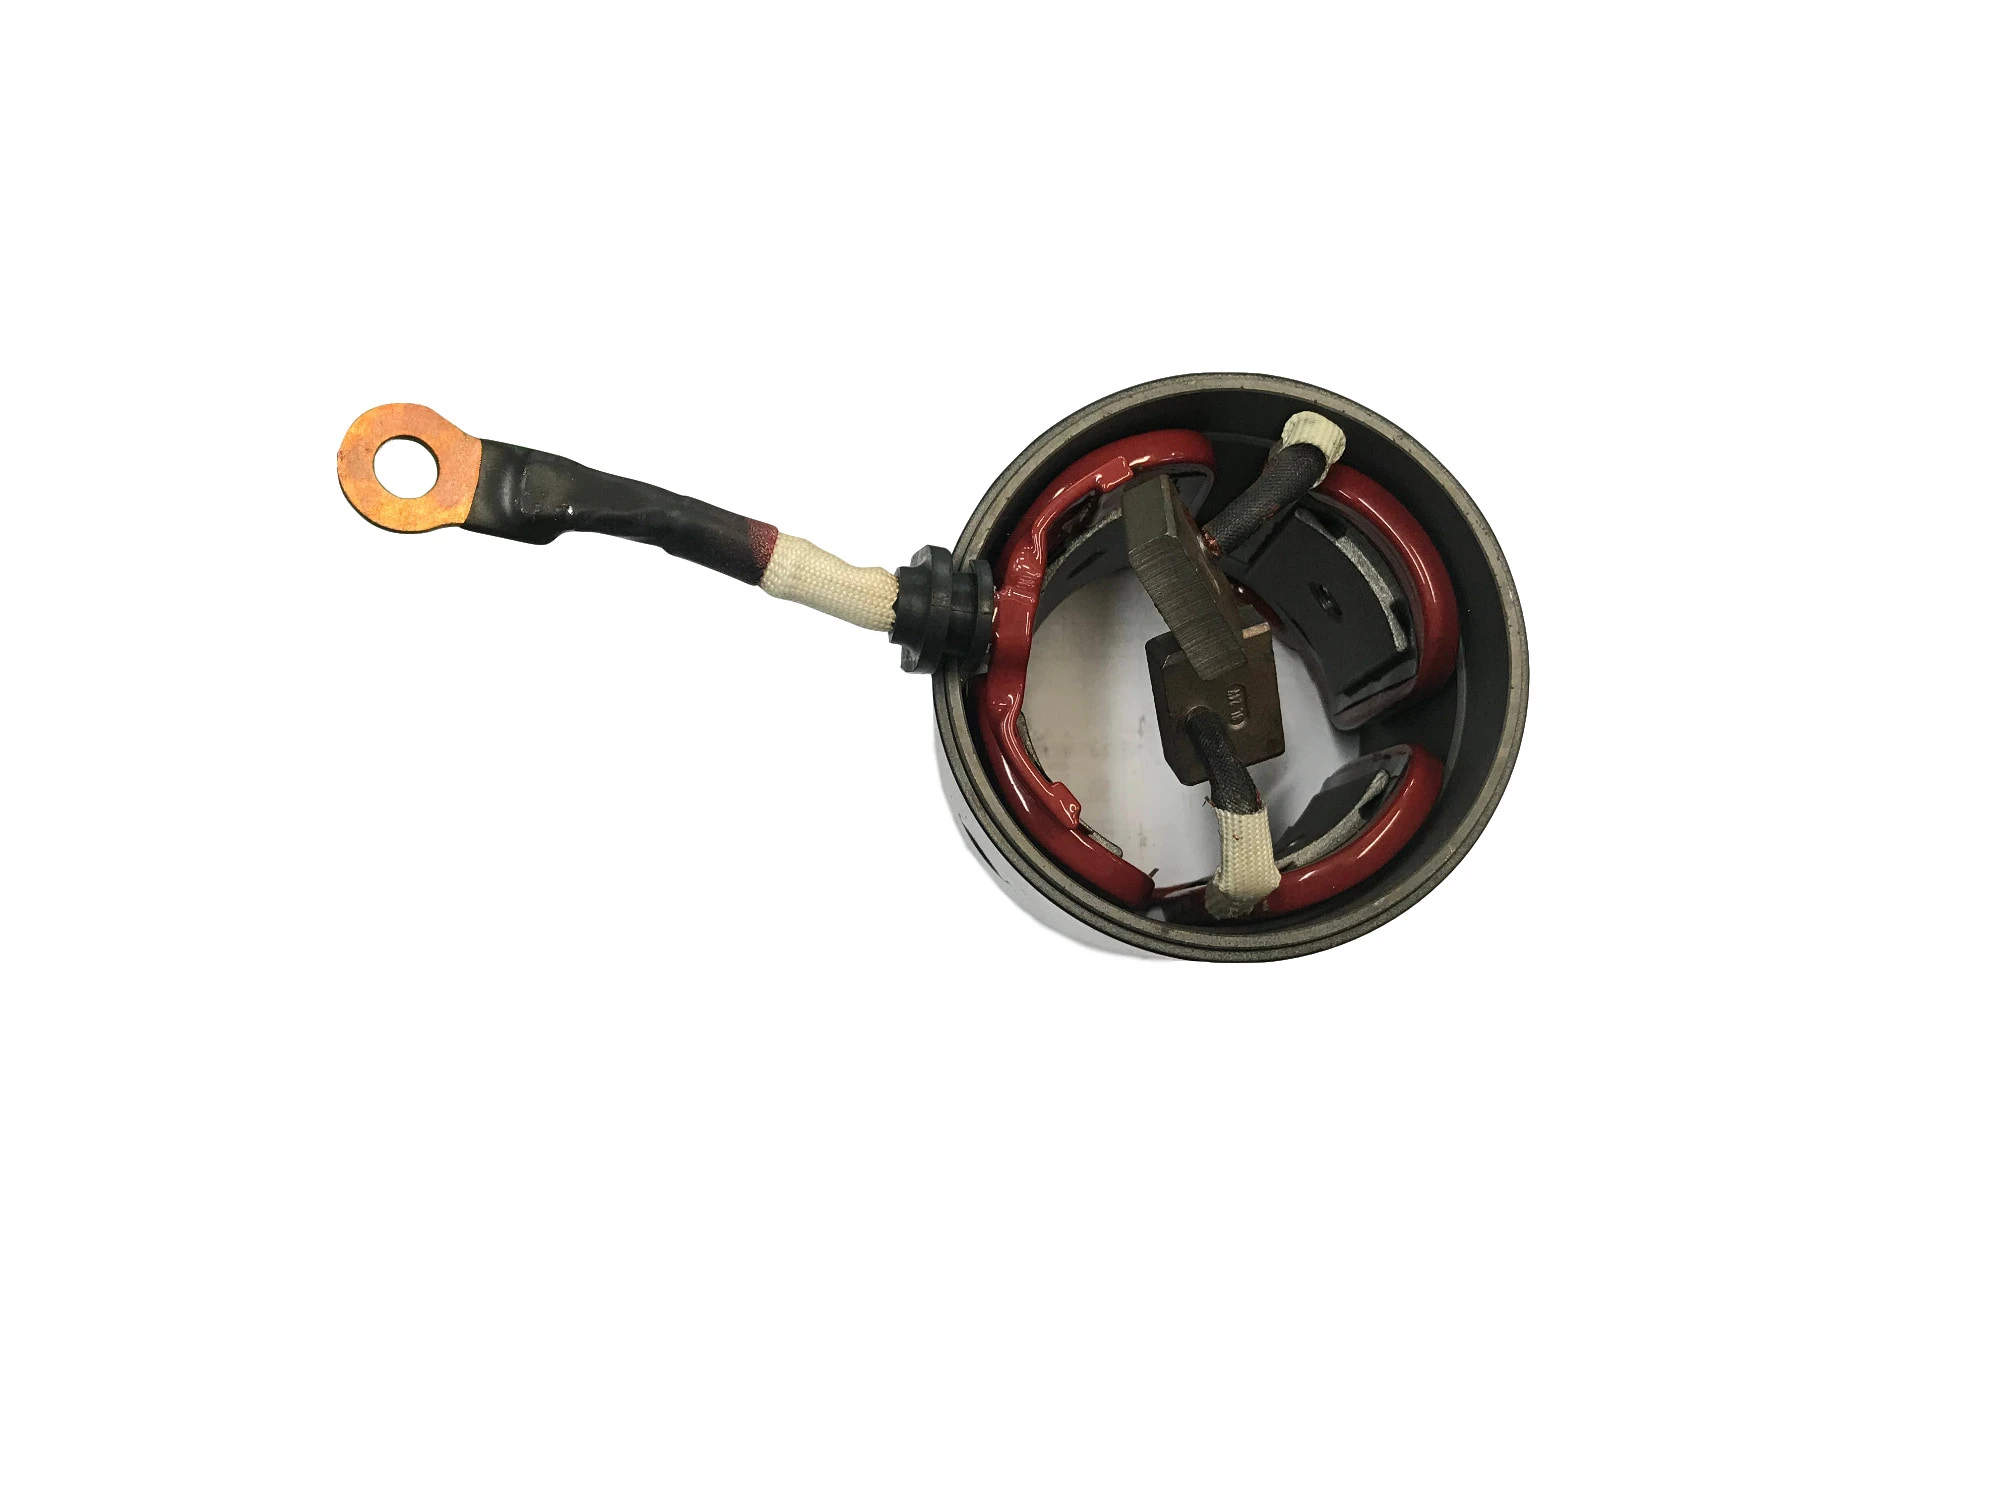 Auto Starter Parts Heavy Duty Starting Motor accessories Stator Assembly Replaces 39MT Series